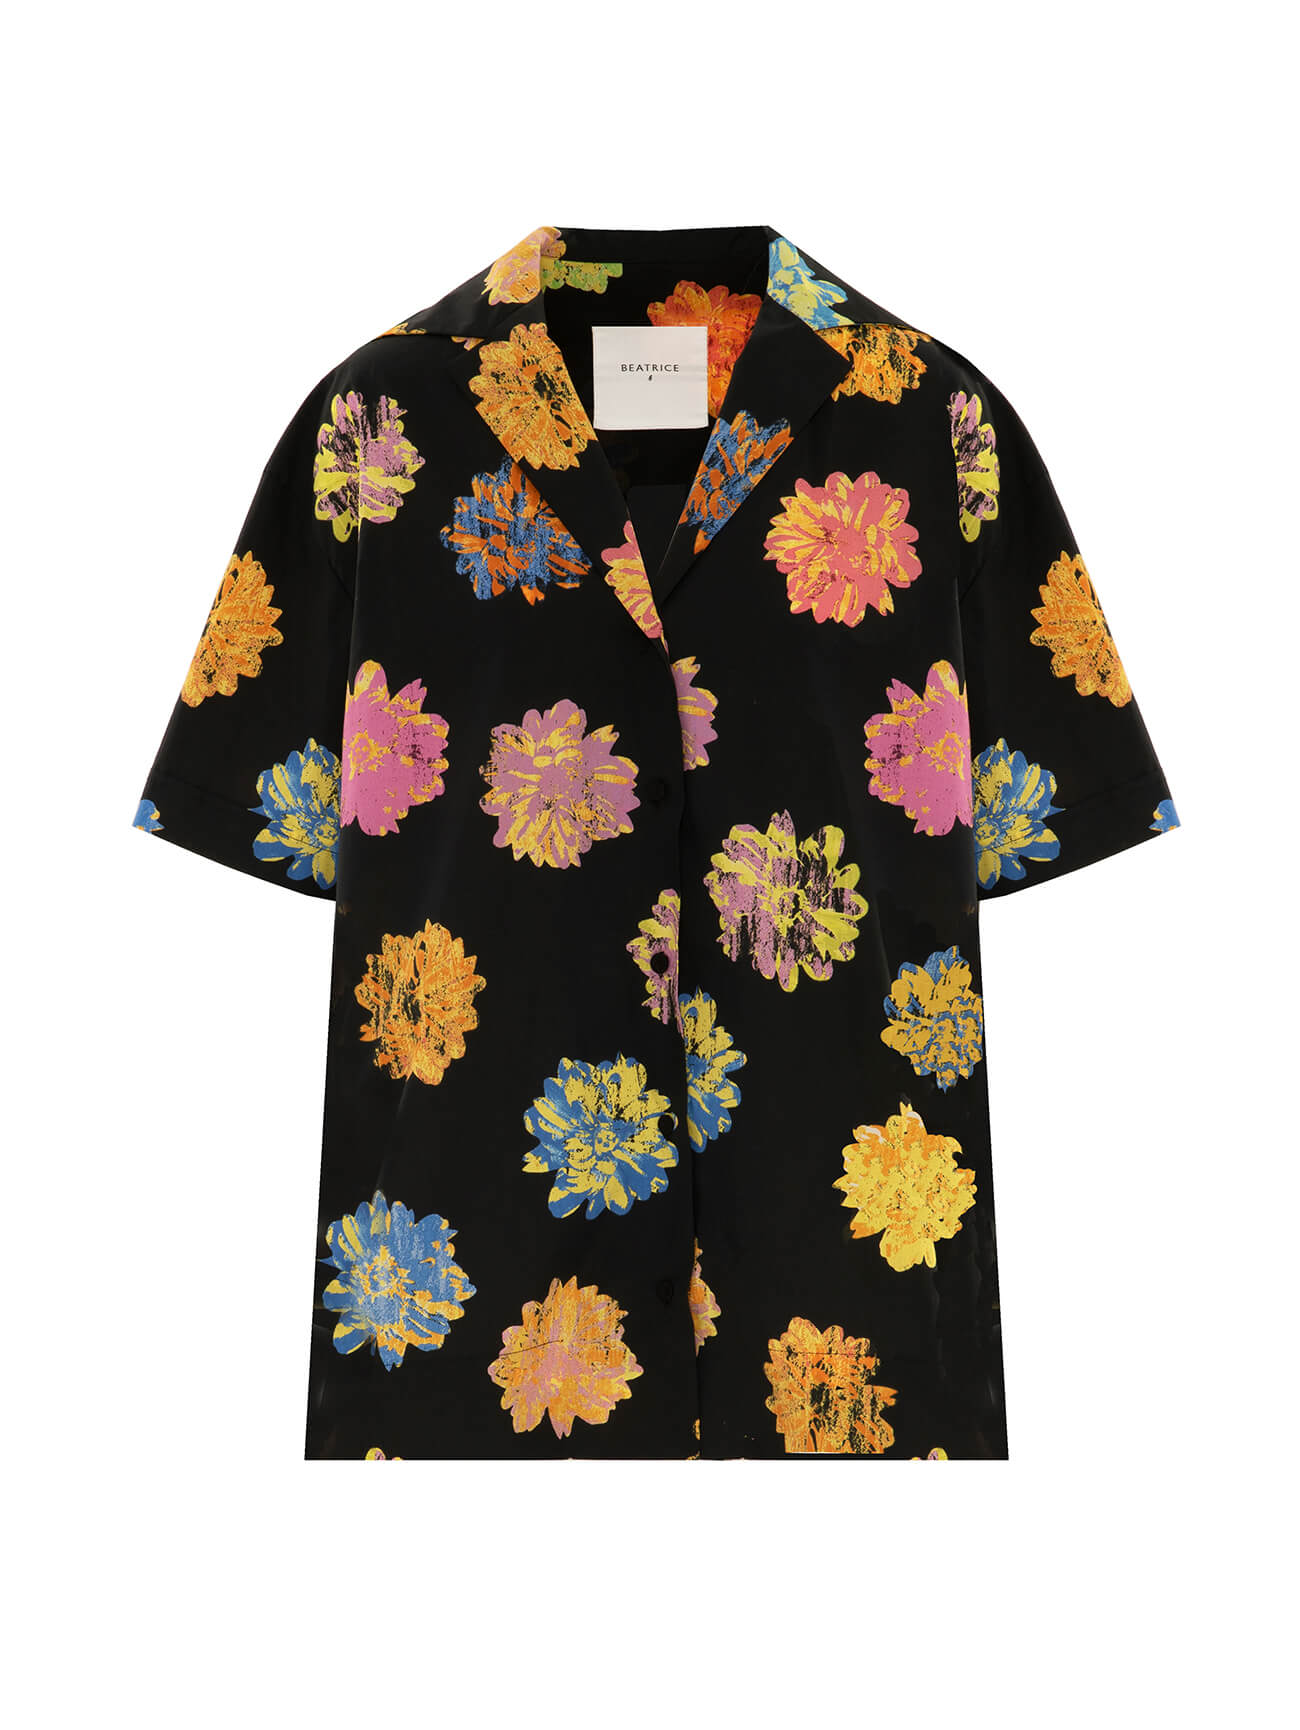 andy's flower bowling shirt